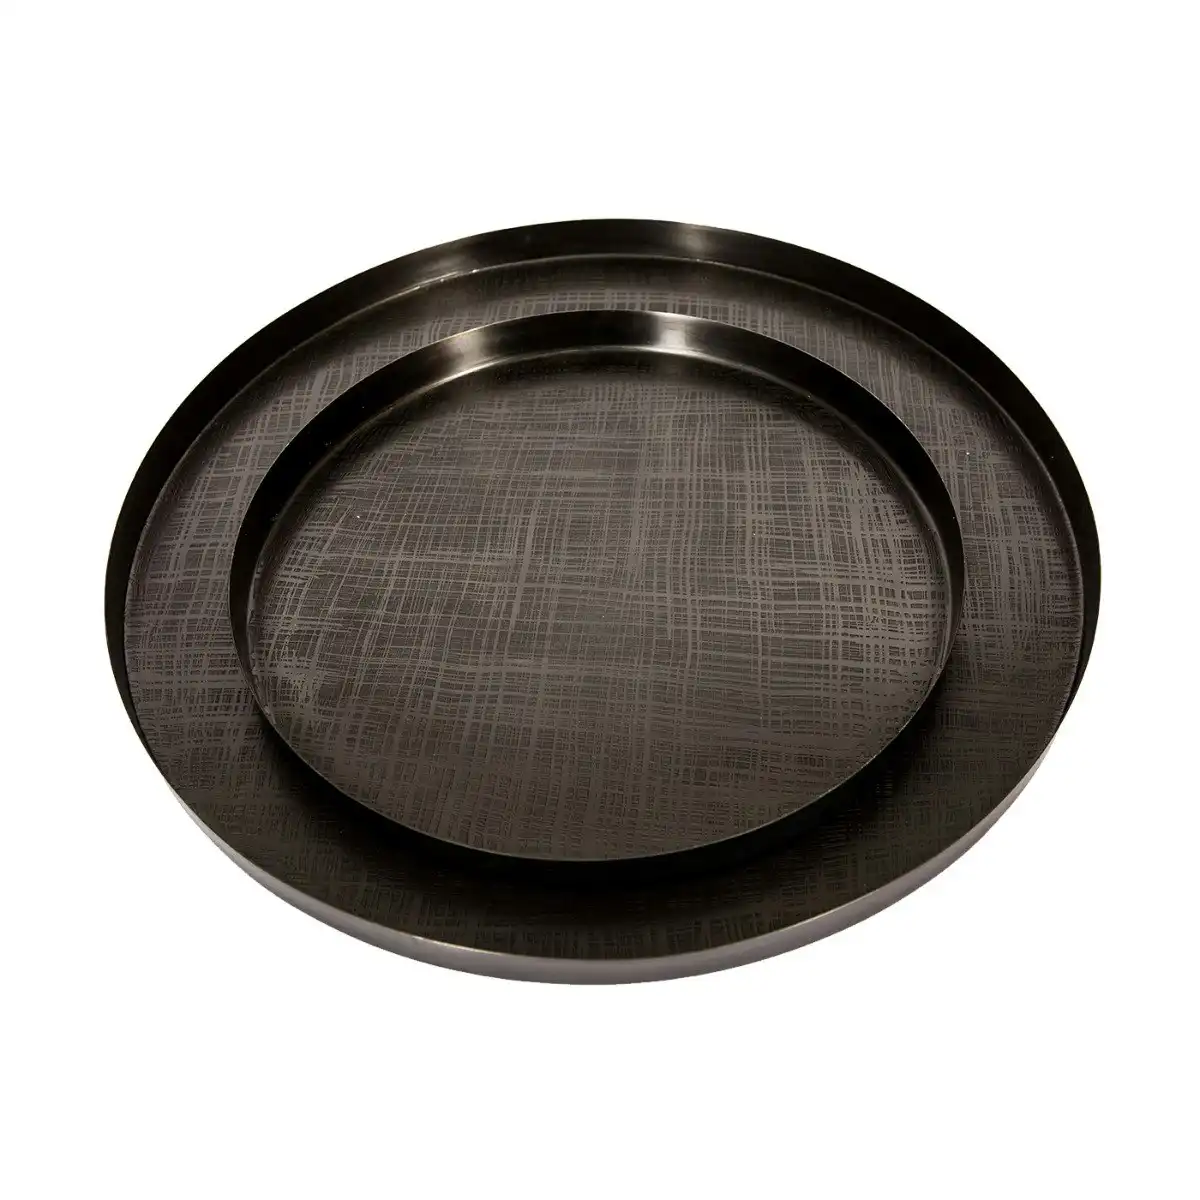 Set of 2 SSH Collection Criss Cross 40 and 56cm Wide Serving Trays - Etched Black